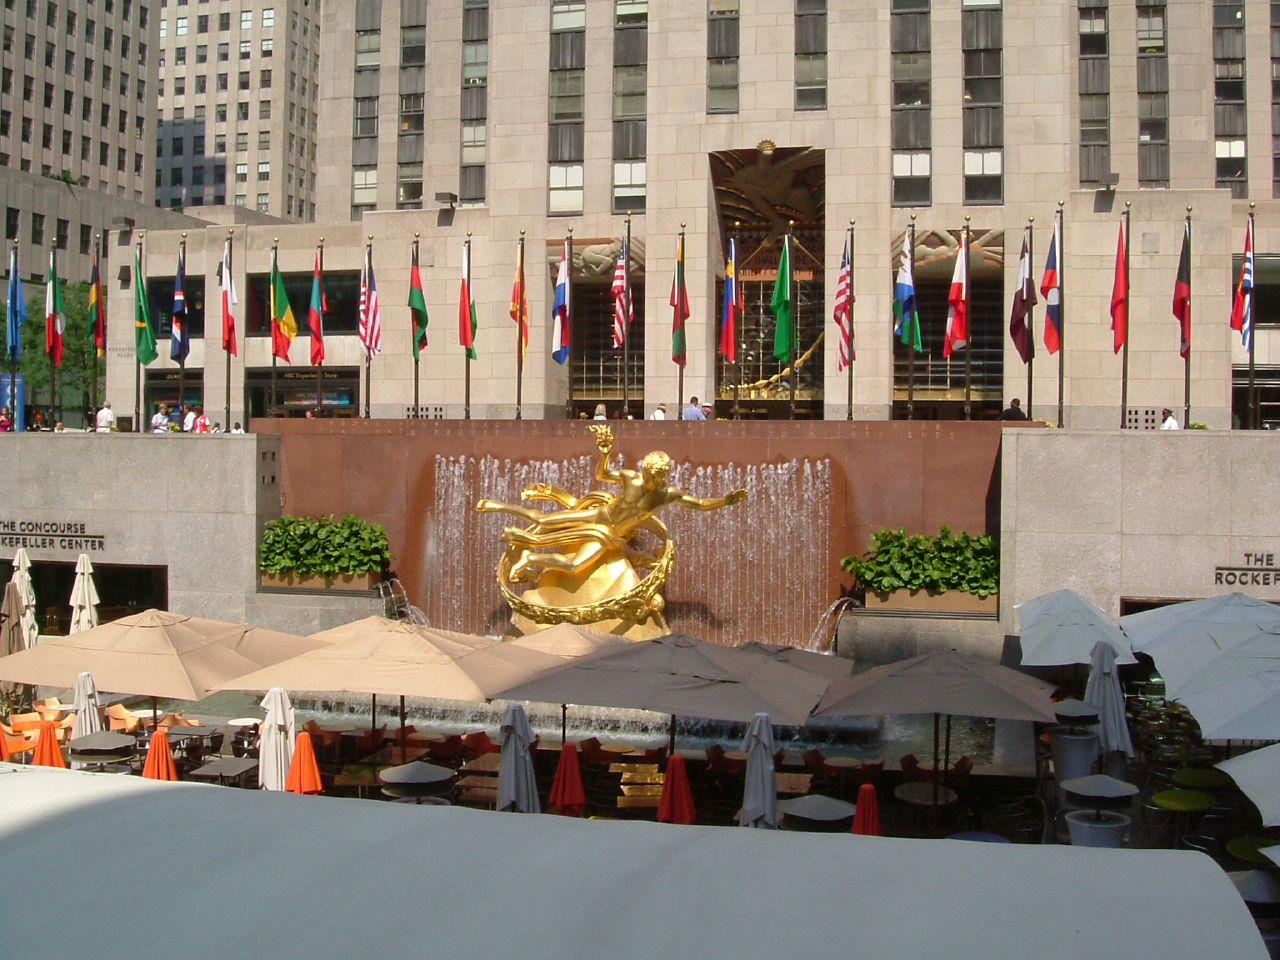 <p>The Rockefeller Center is a must-see attraction in NYC. Not only is it a tourist hot-spot for many different activities, it is also home to many American traditional events, such as the annual Christmas Tree Lighting.</p><p><strong>Features:</strong> Top of the Rock (observation decks), Ice Rink, Rainbow Room, Tours, Food & Drink, Events and CelebrationsRob Young, CC BY 2.0, Wikimedia Commons</p>